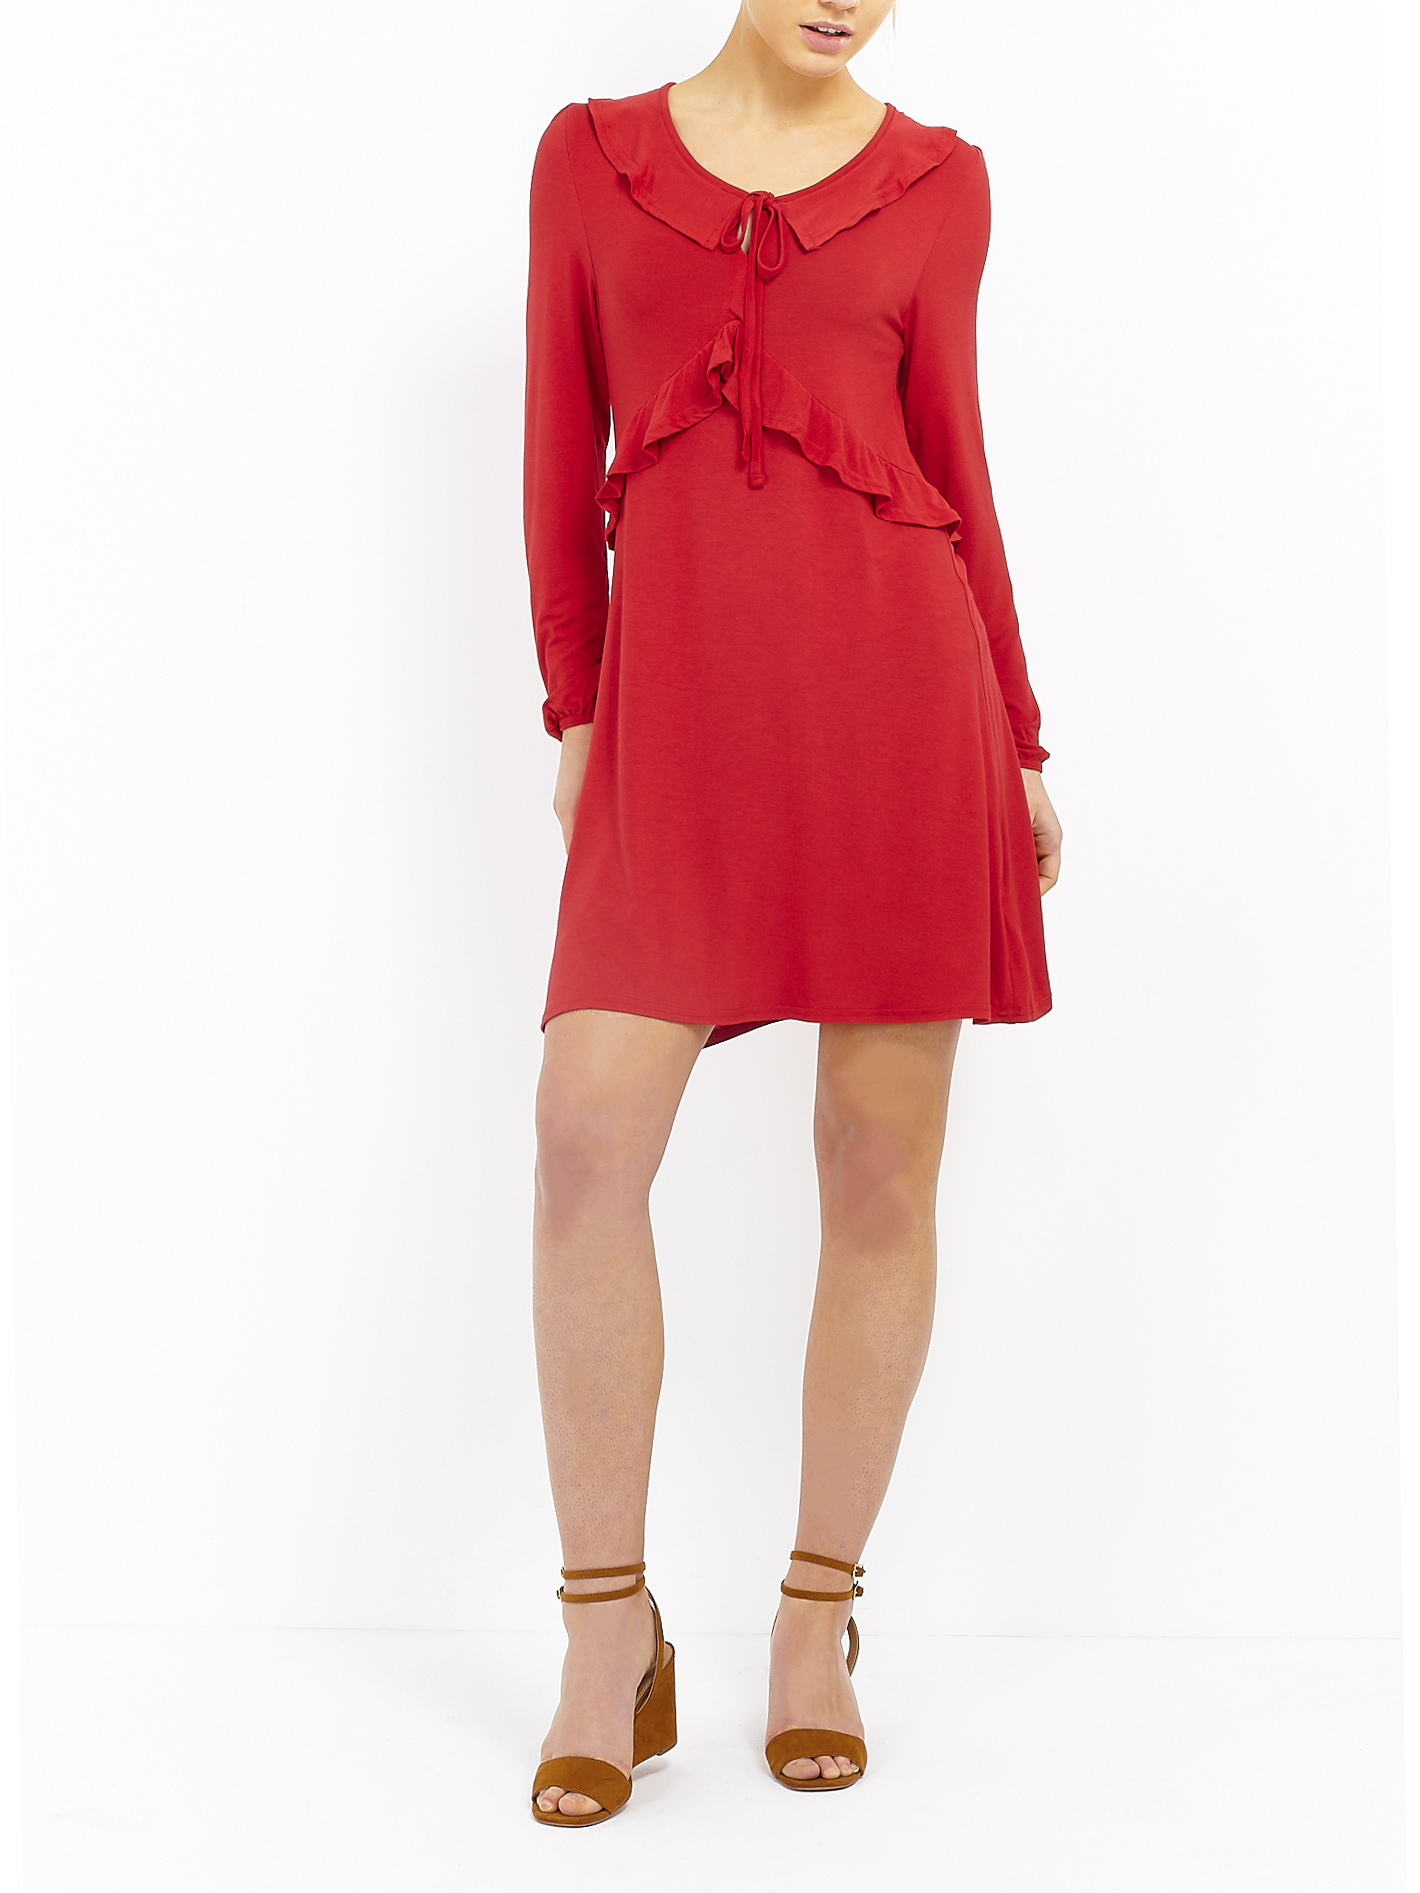 Brave Soul London Red Dress Frill Detail Size XS RRP £29.99 CLEARANCE XL £2.99 or 2 for £5